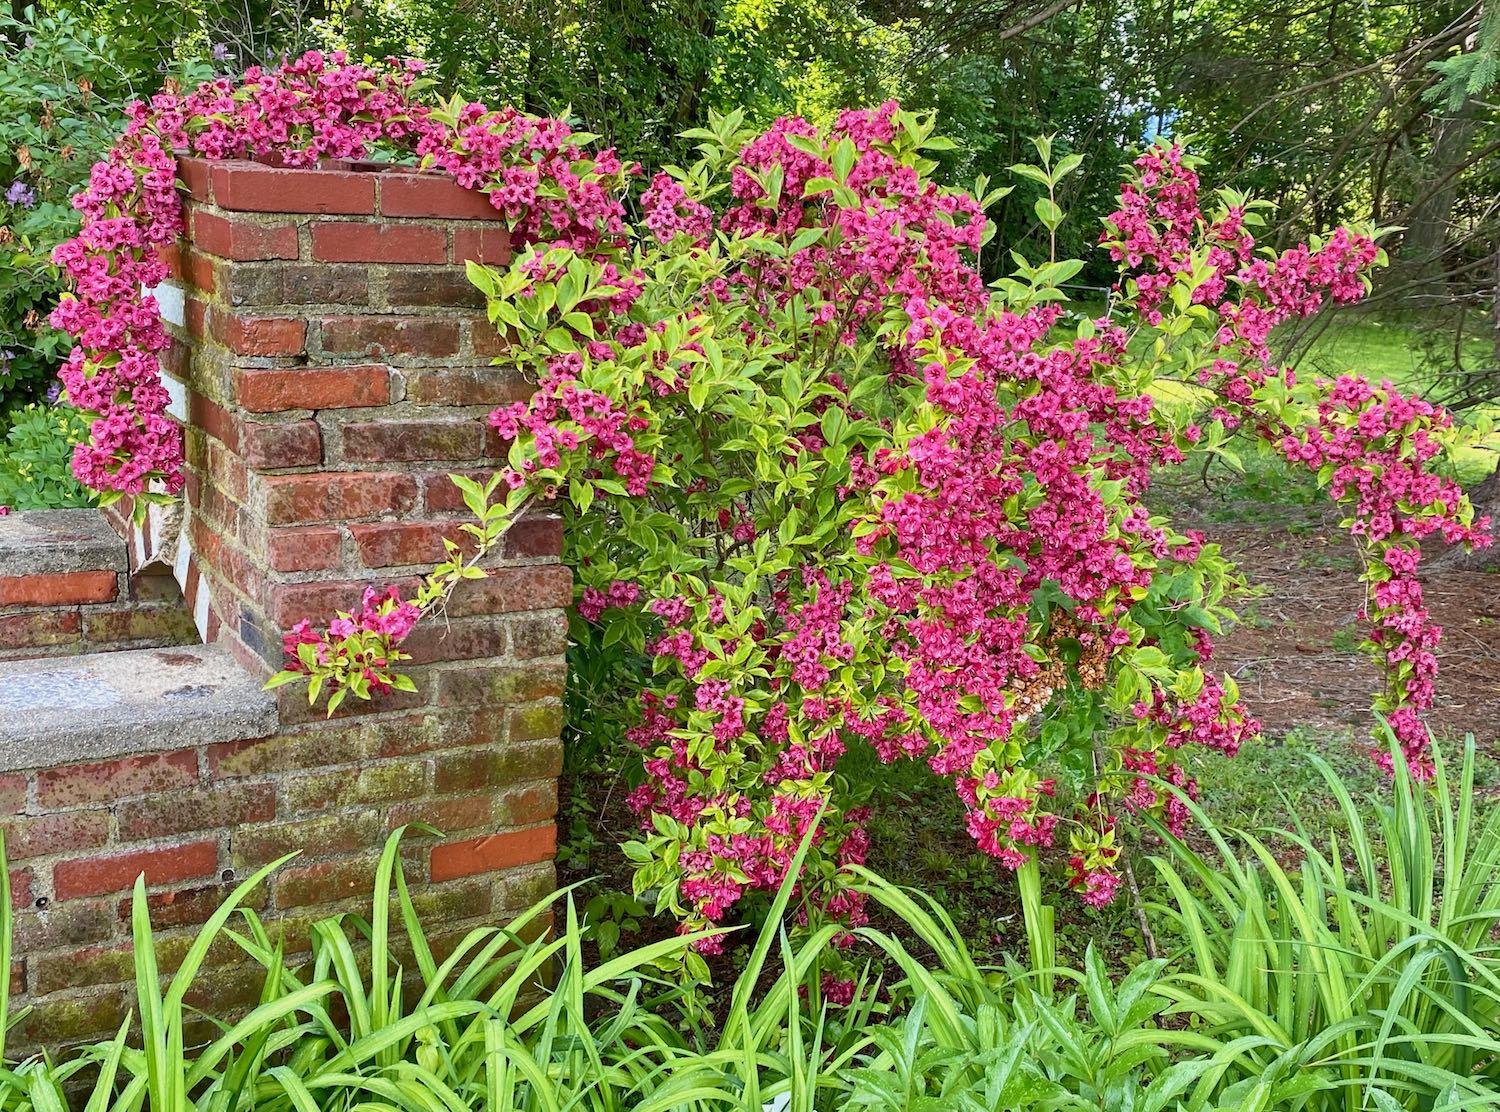 It's the weekend! Number 300, Weigela Grows Around a Brick Fireplace